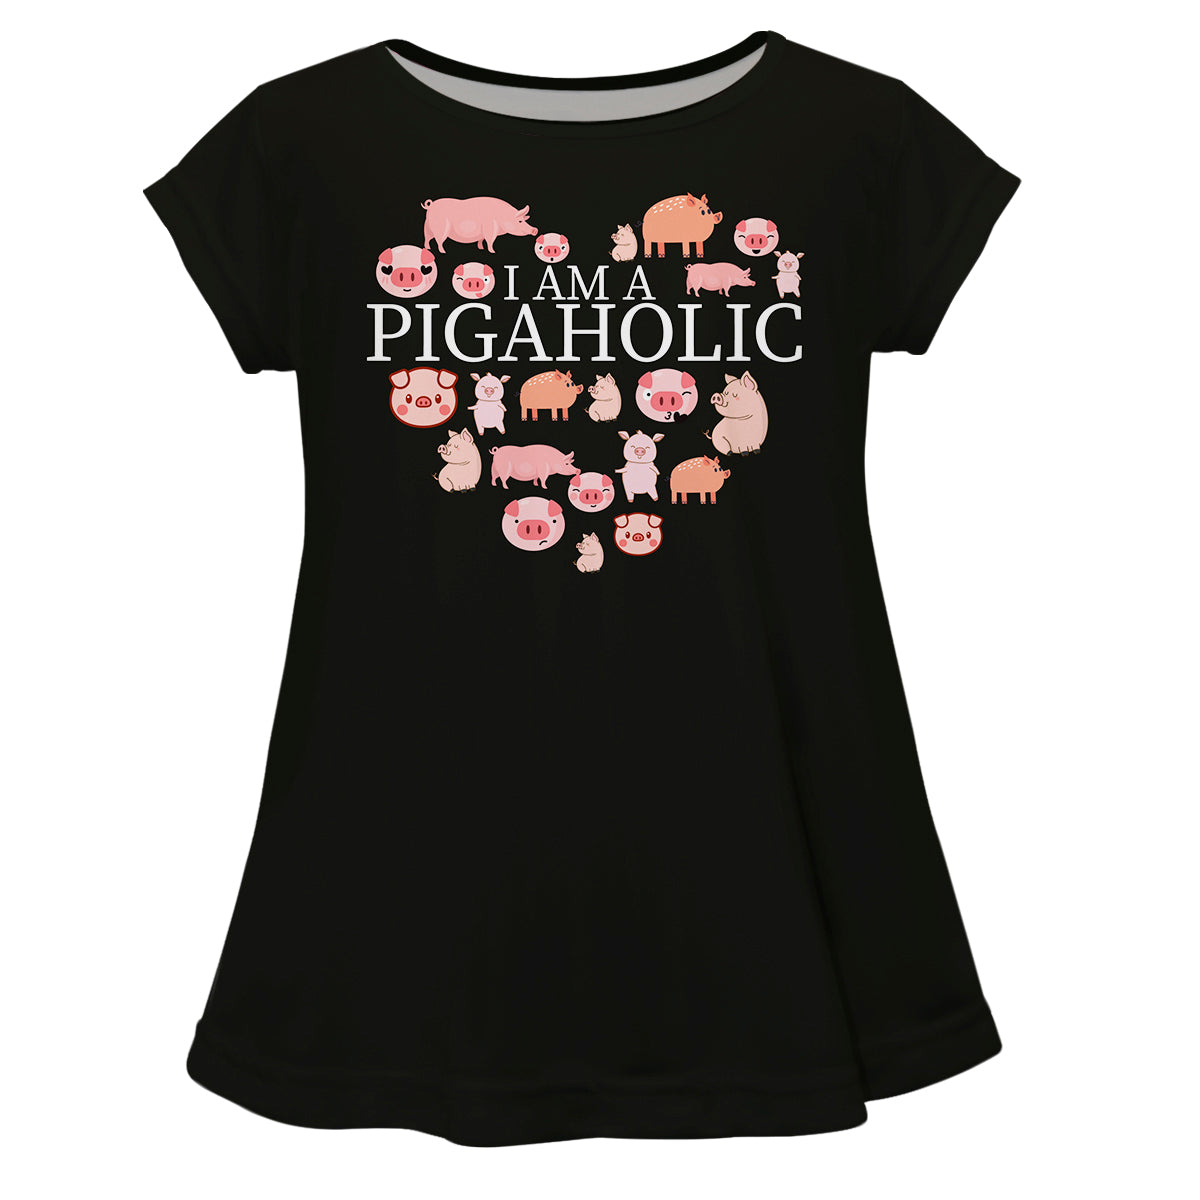 I Am a Pigaholic Black Short Sleeve Laurie Top - Wimziy&Co.